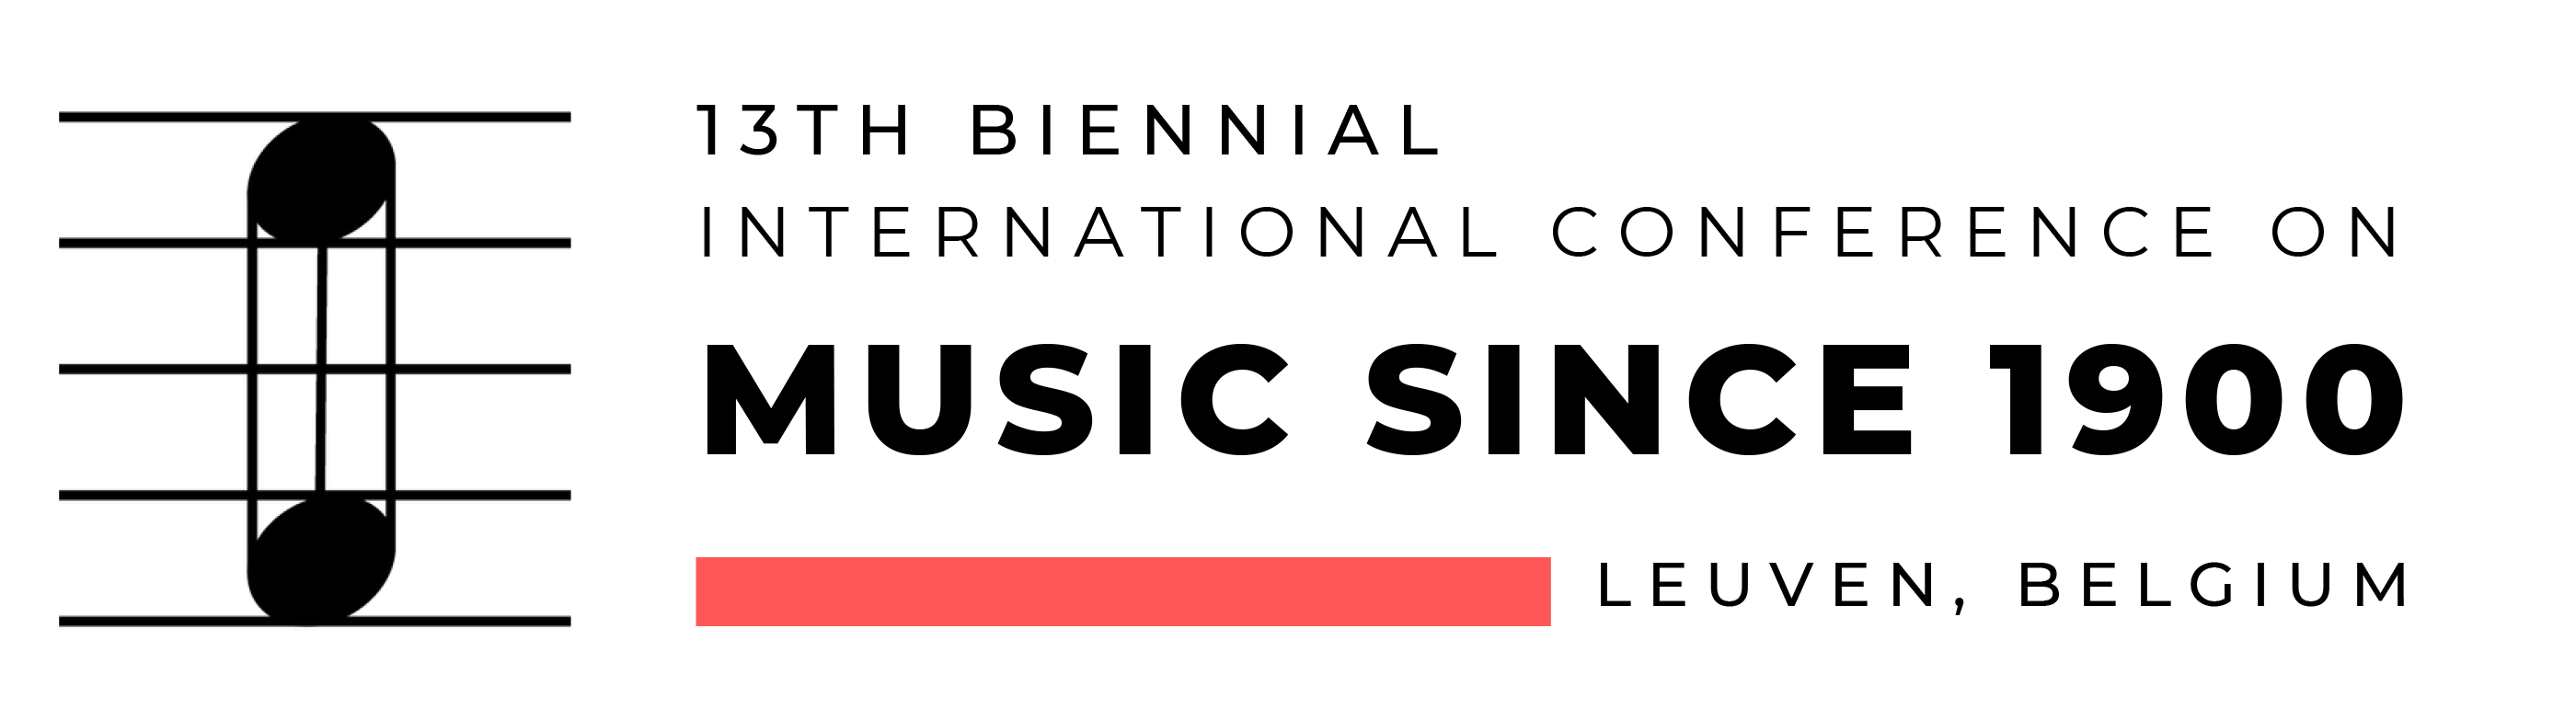 CFP: 13th Biennial International Conference on Music Since 1900